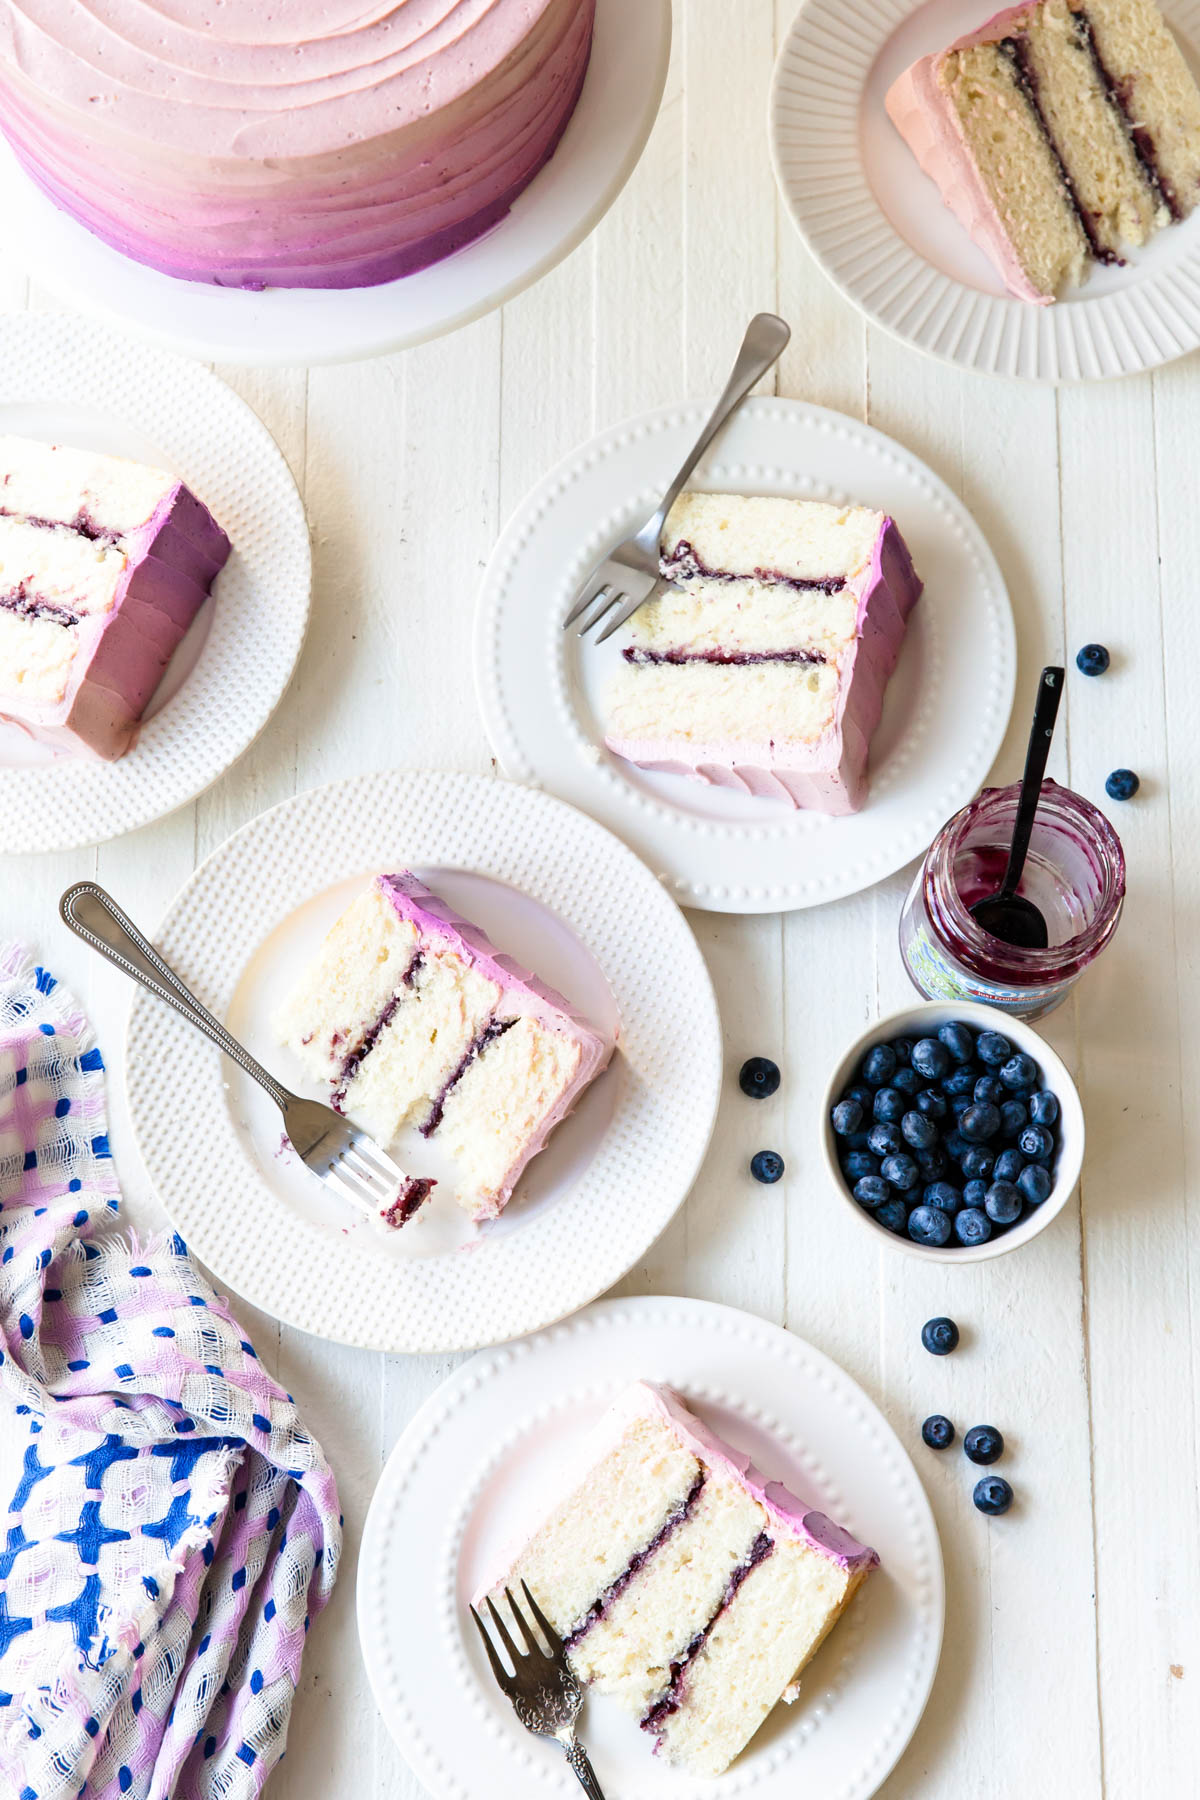 Slices of a three-layer white cake filled with blueberry jam